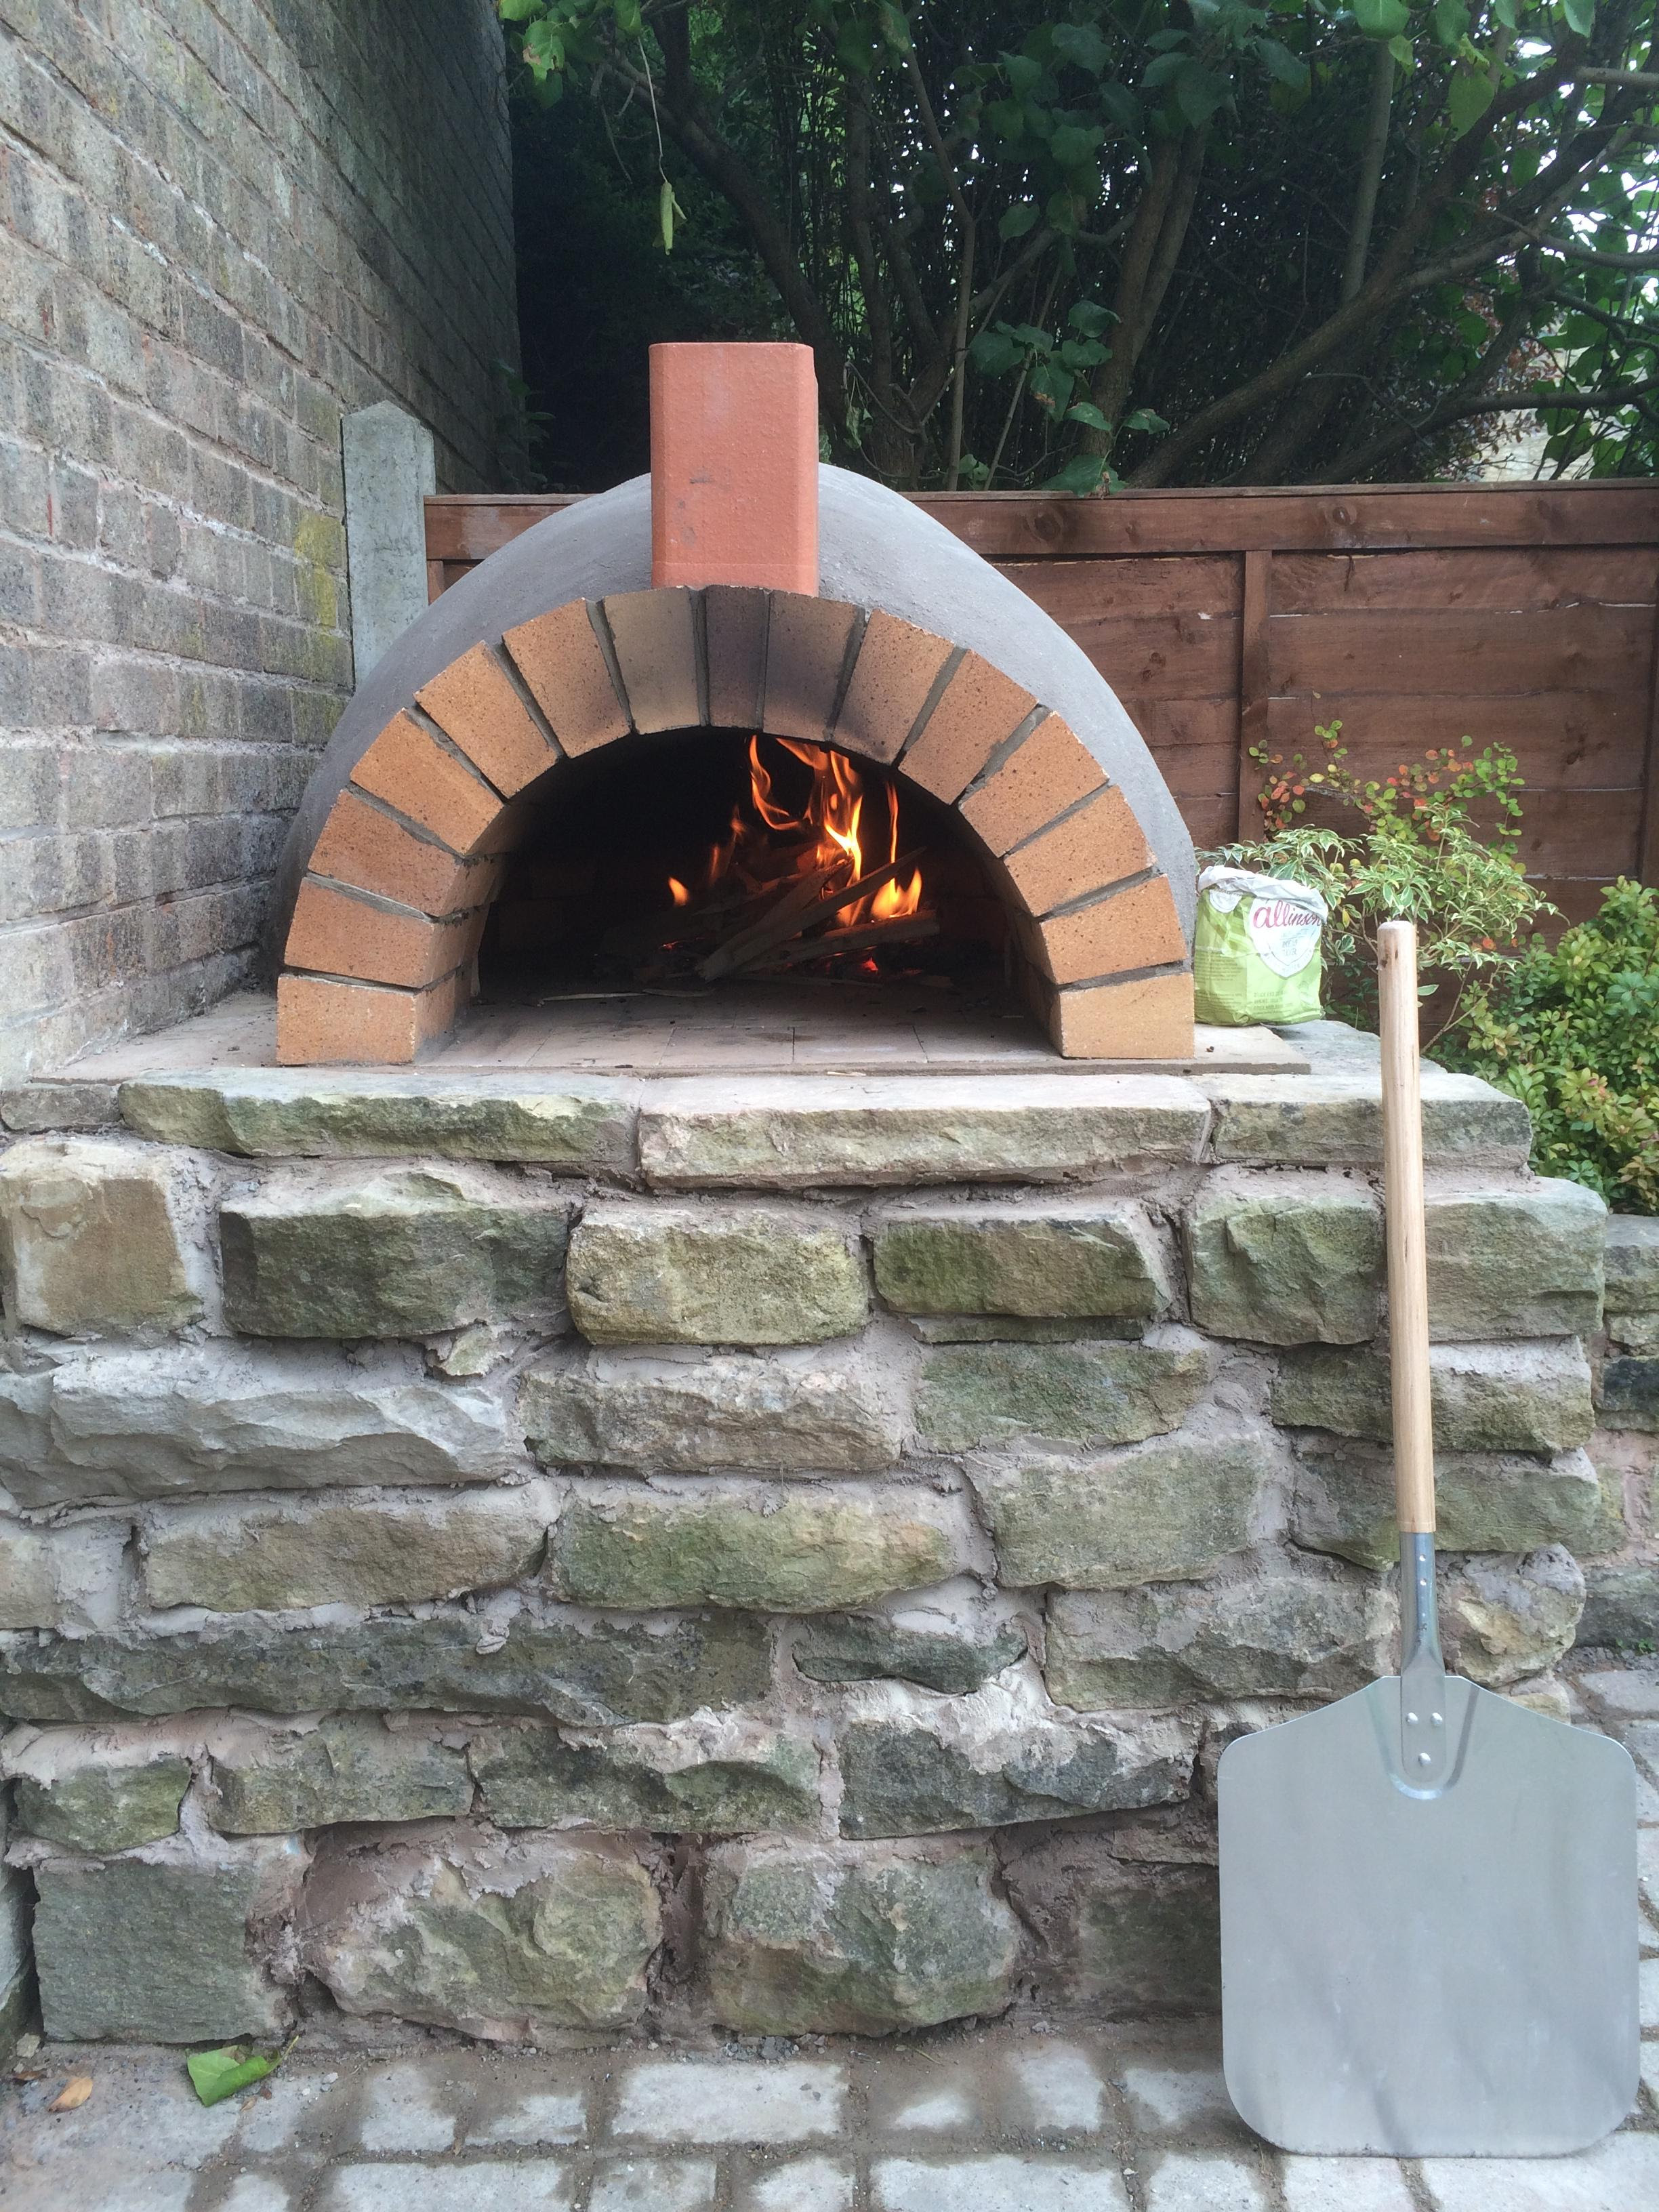 Steps To Make Best Outdoor Brick Pizza Oven | DIY Guide